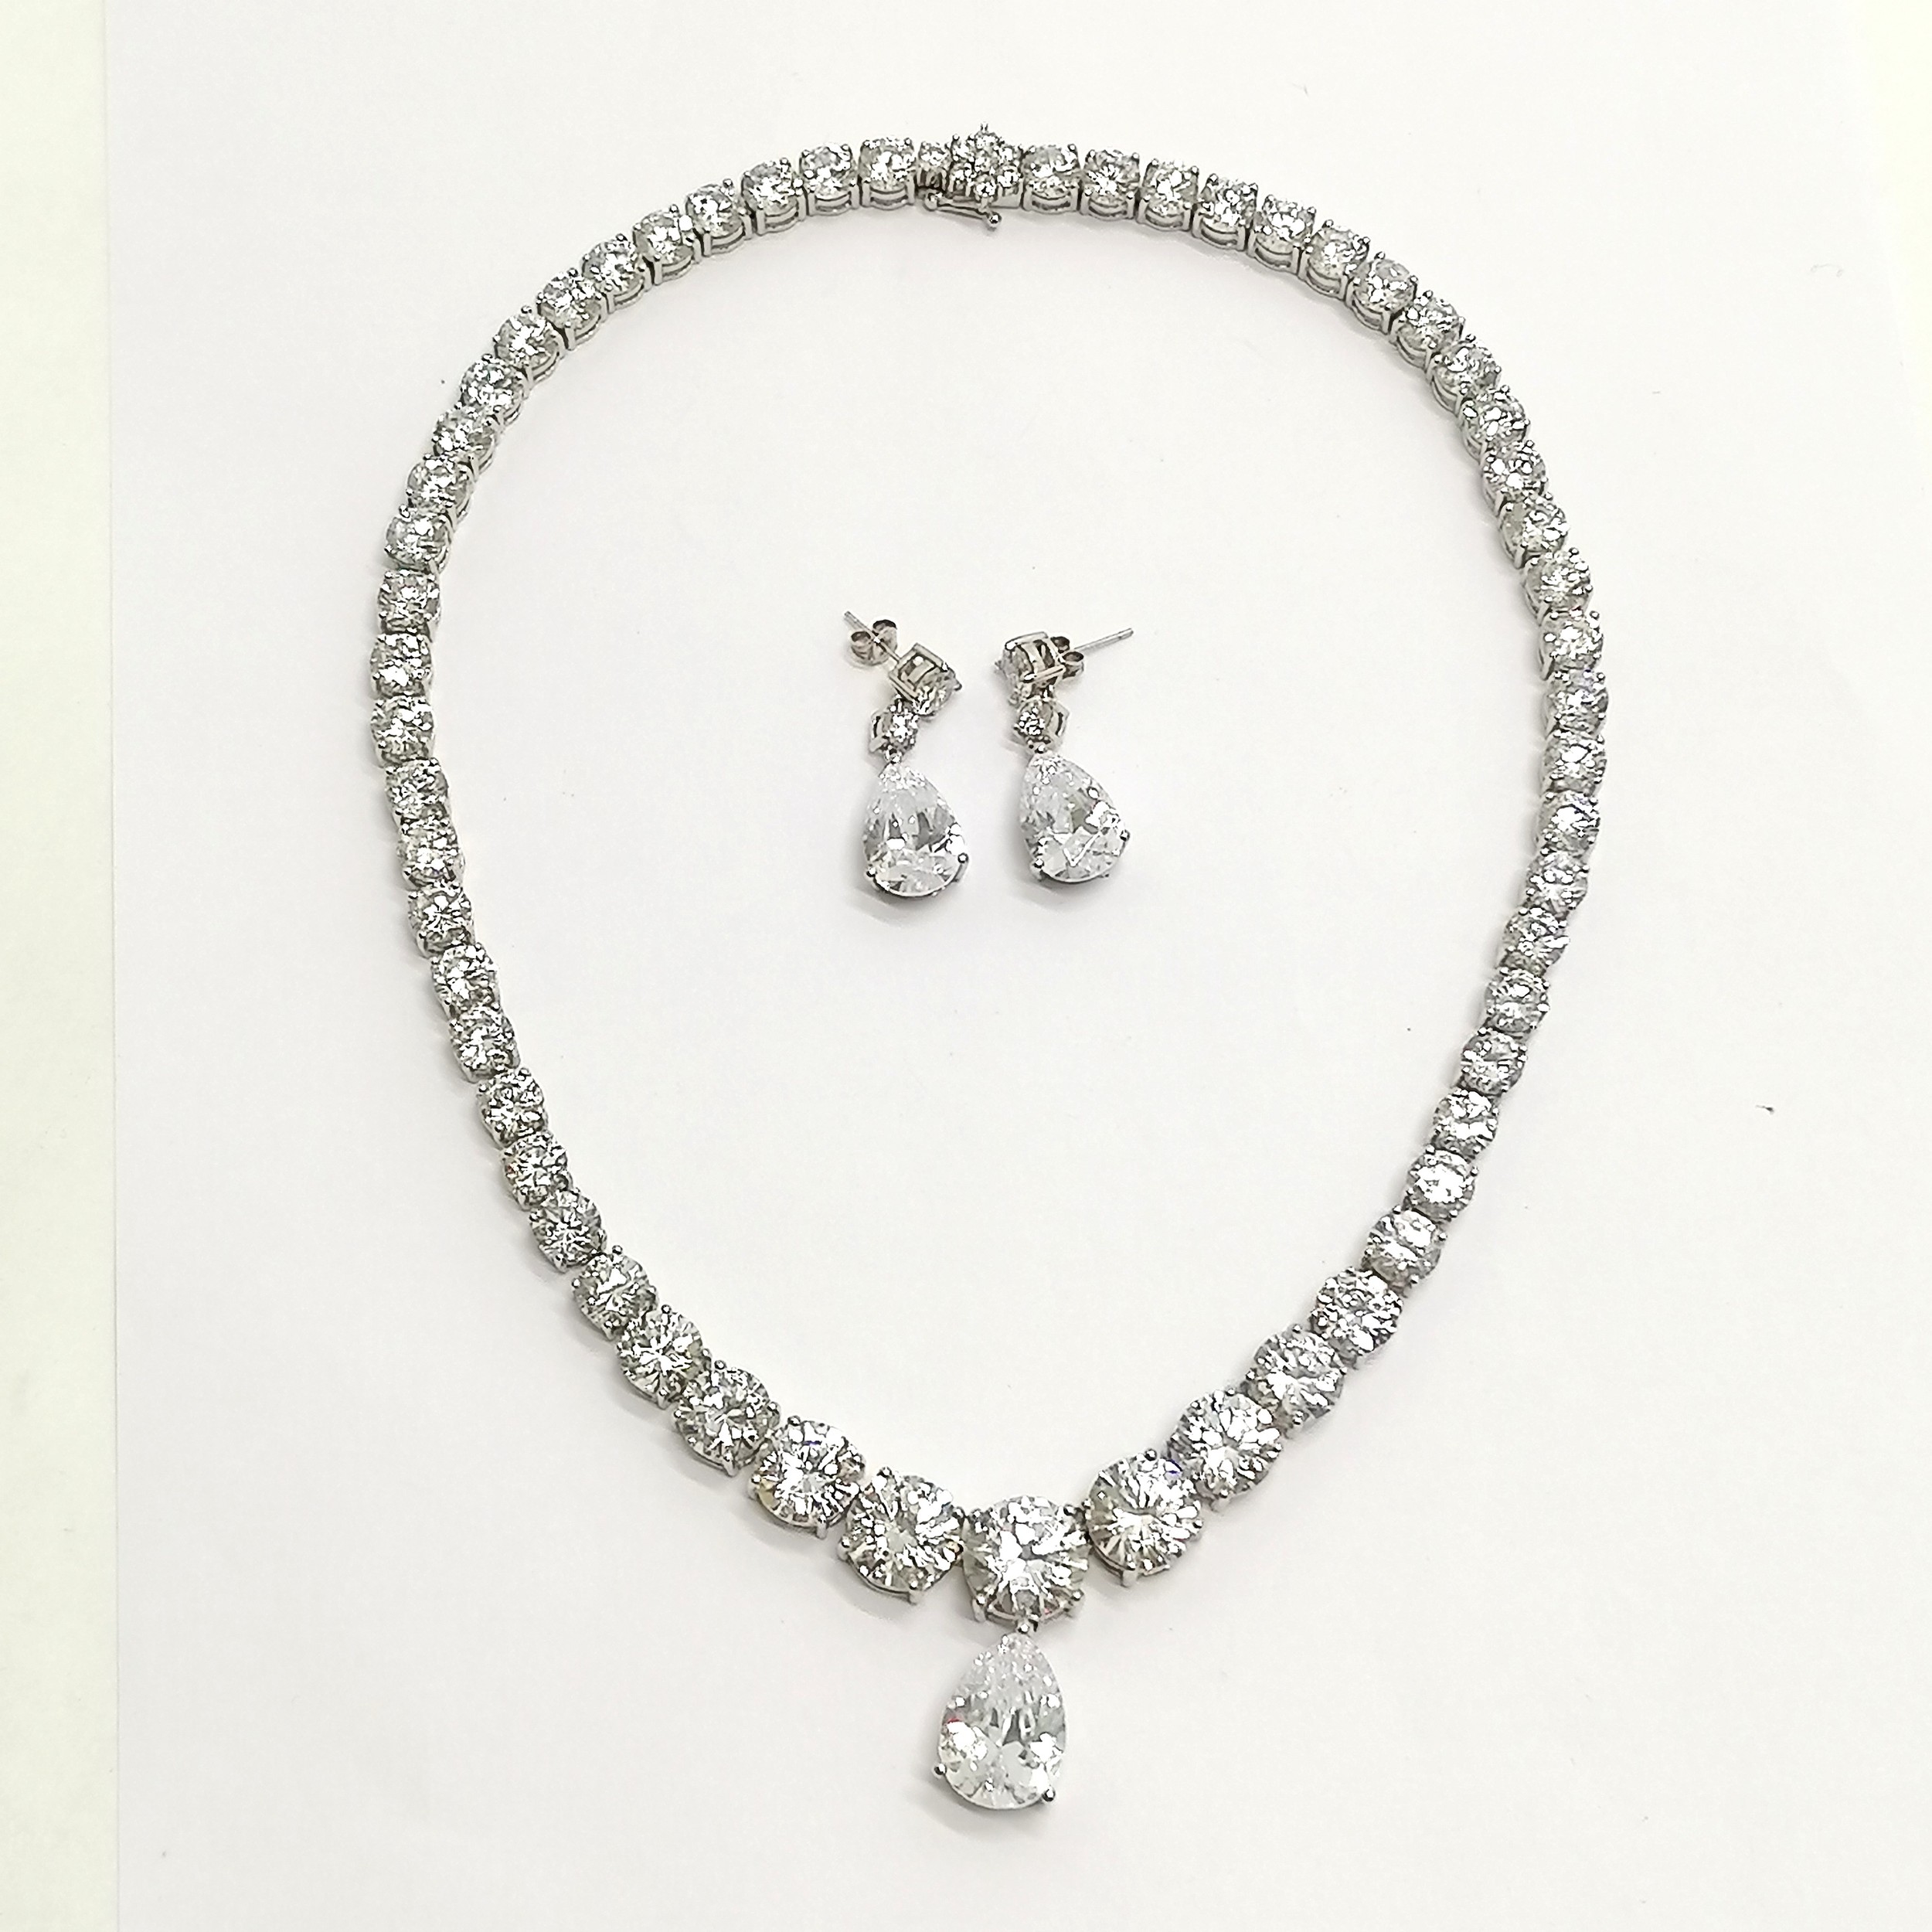 Silver hallmarked white stone / crystal necklace (47cm) with pendant drop and matching earrings (3cm - Image 3 of 4